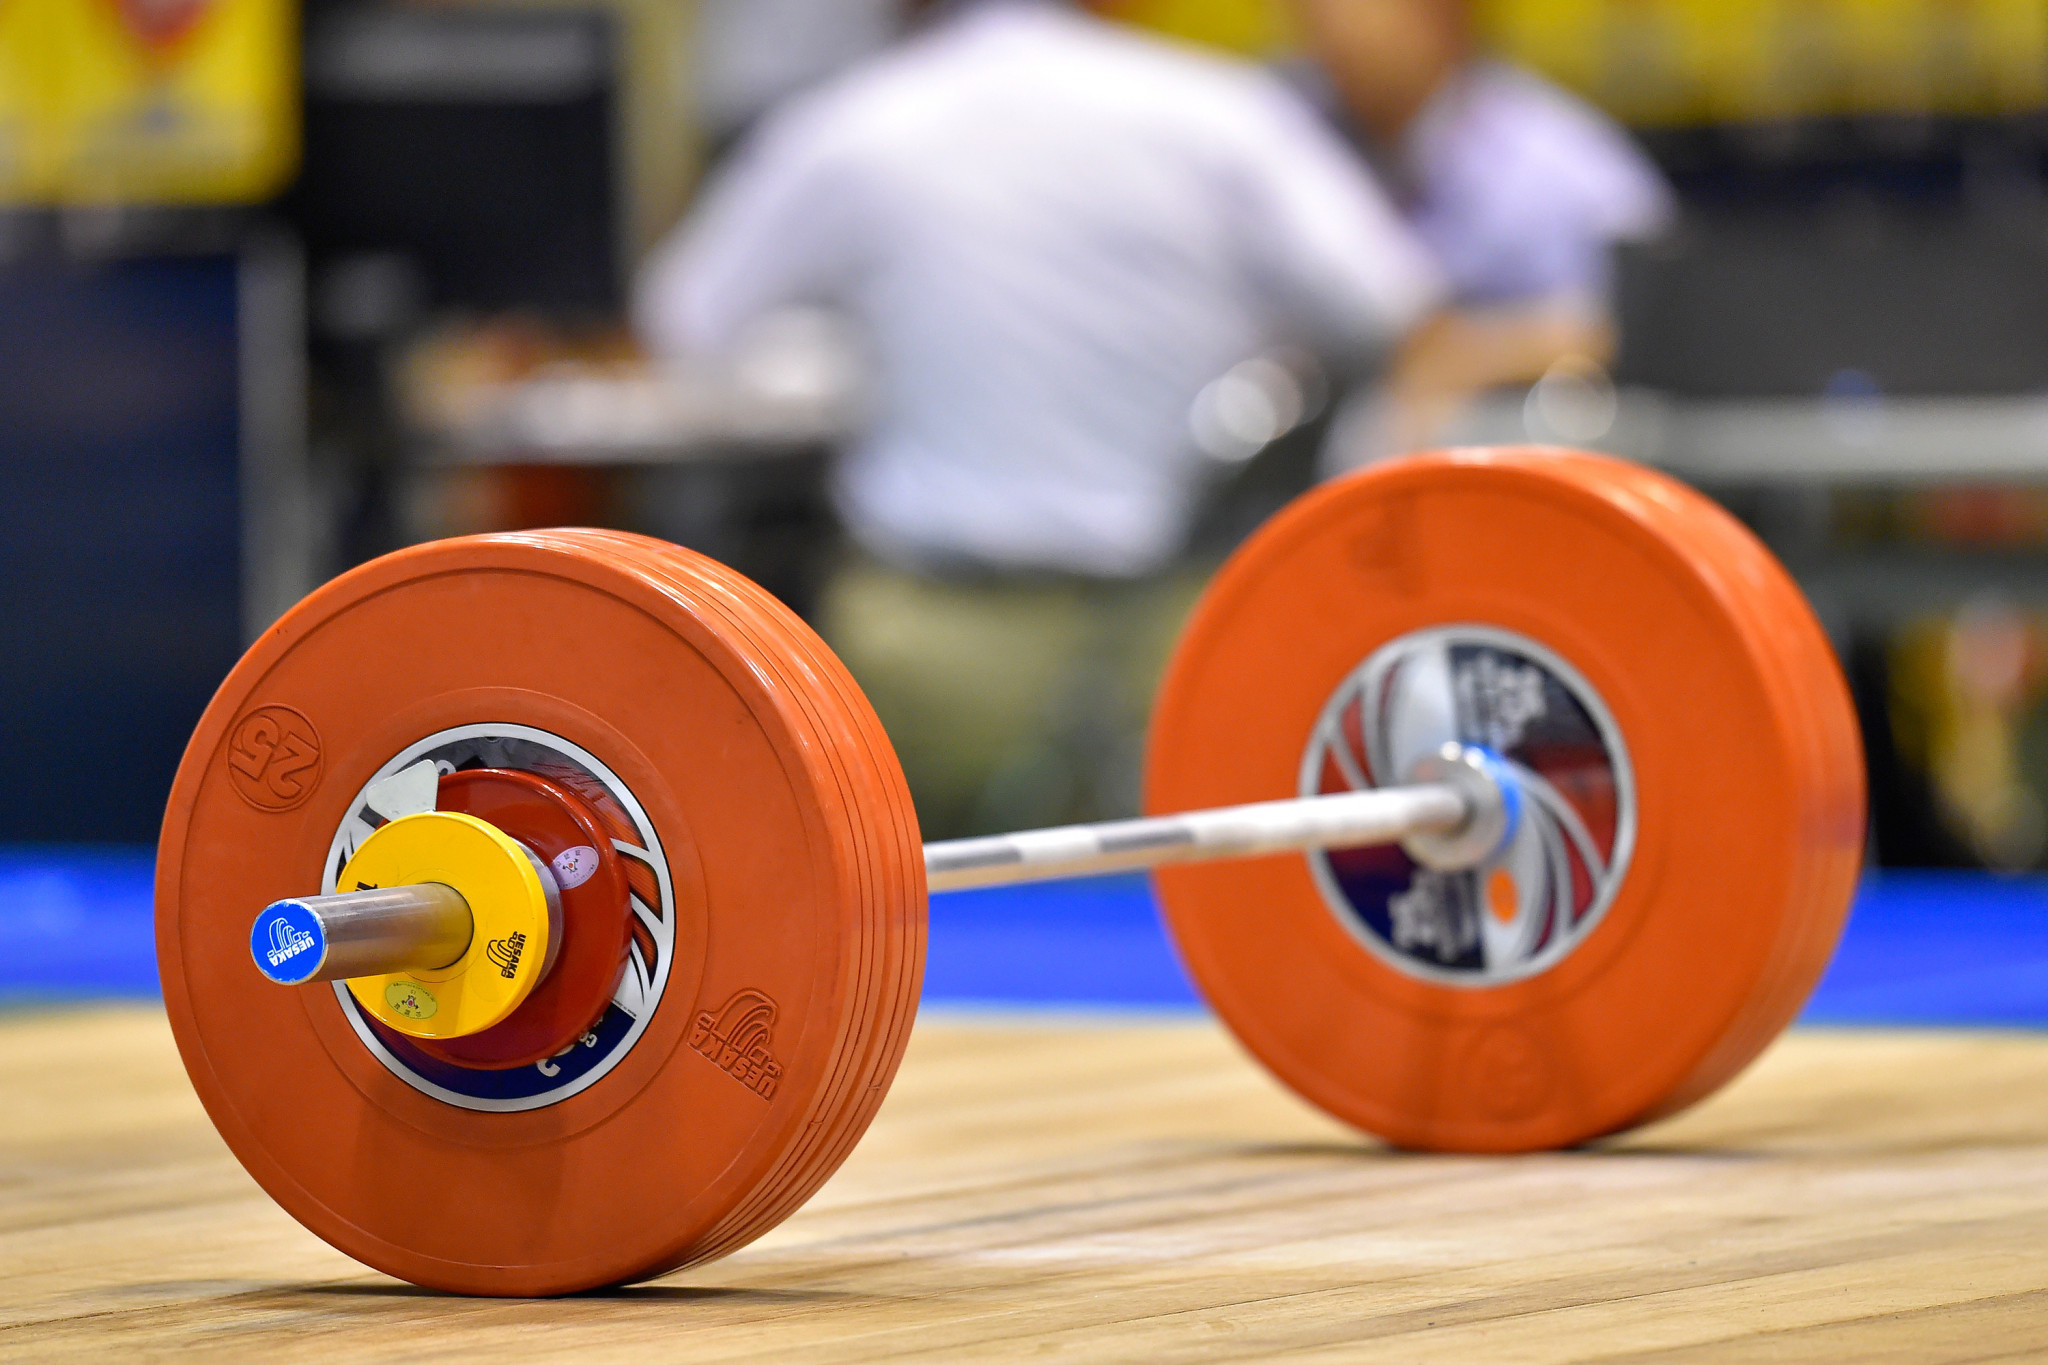 European Weightlifting Federation follows IOC line and ditches Russia as hosts